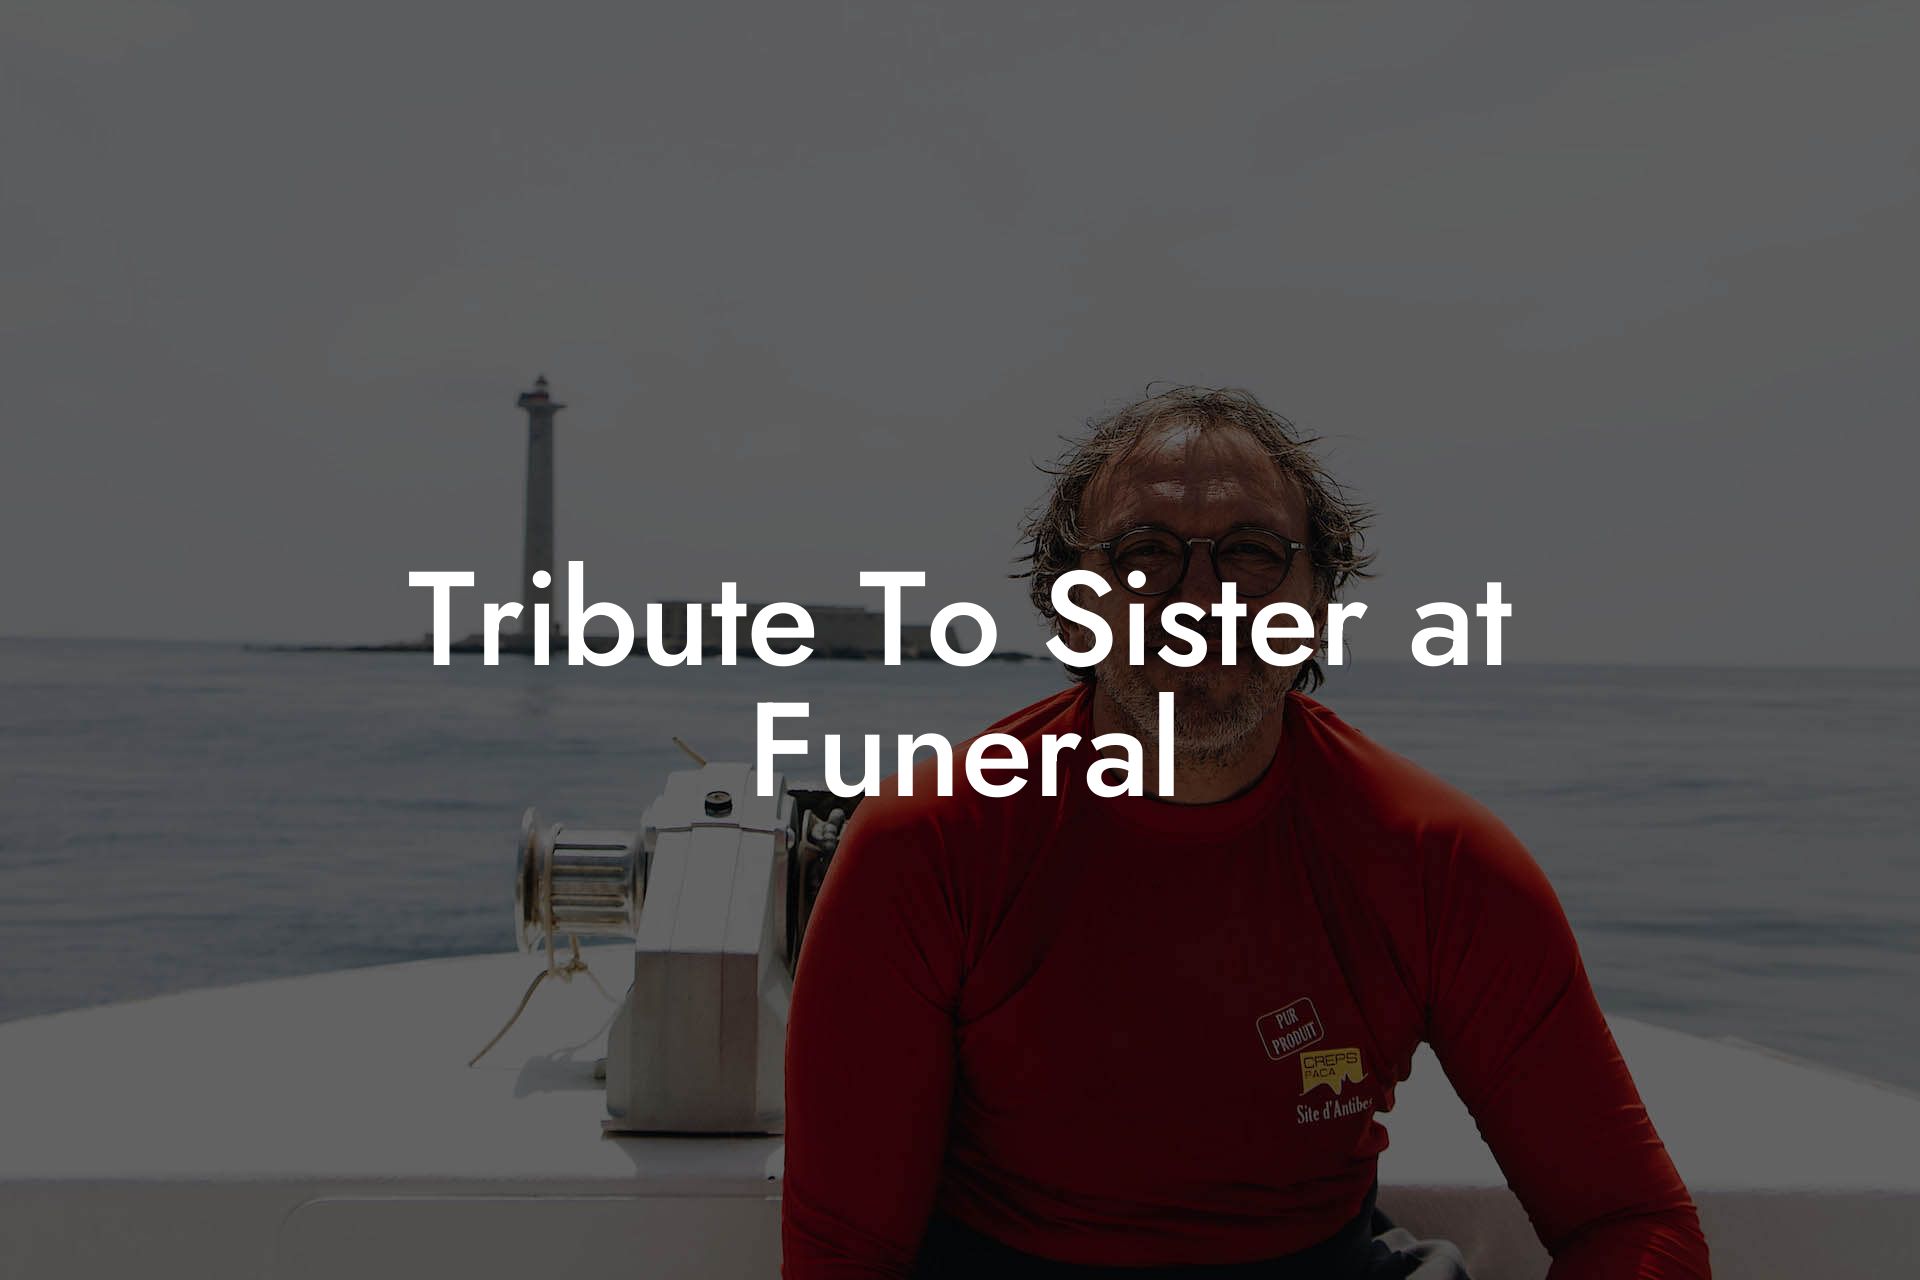 Tribute To Sister at Funeral